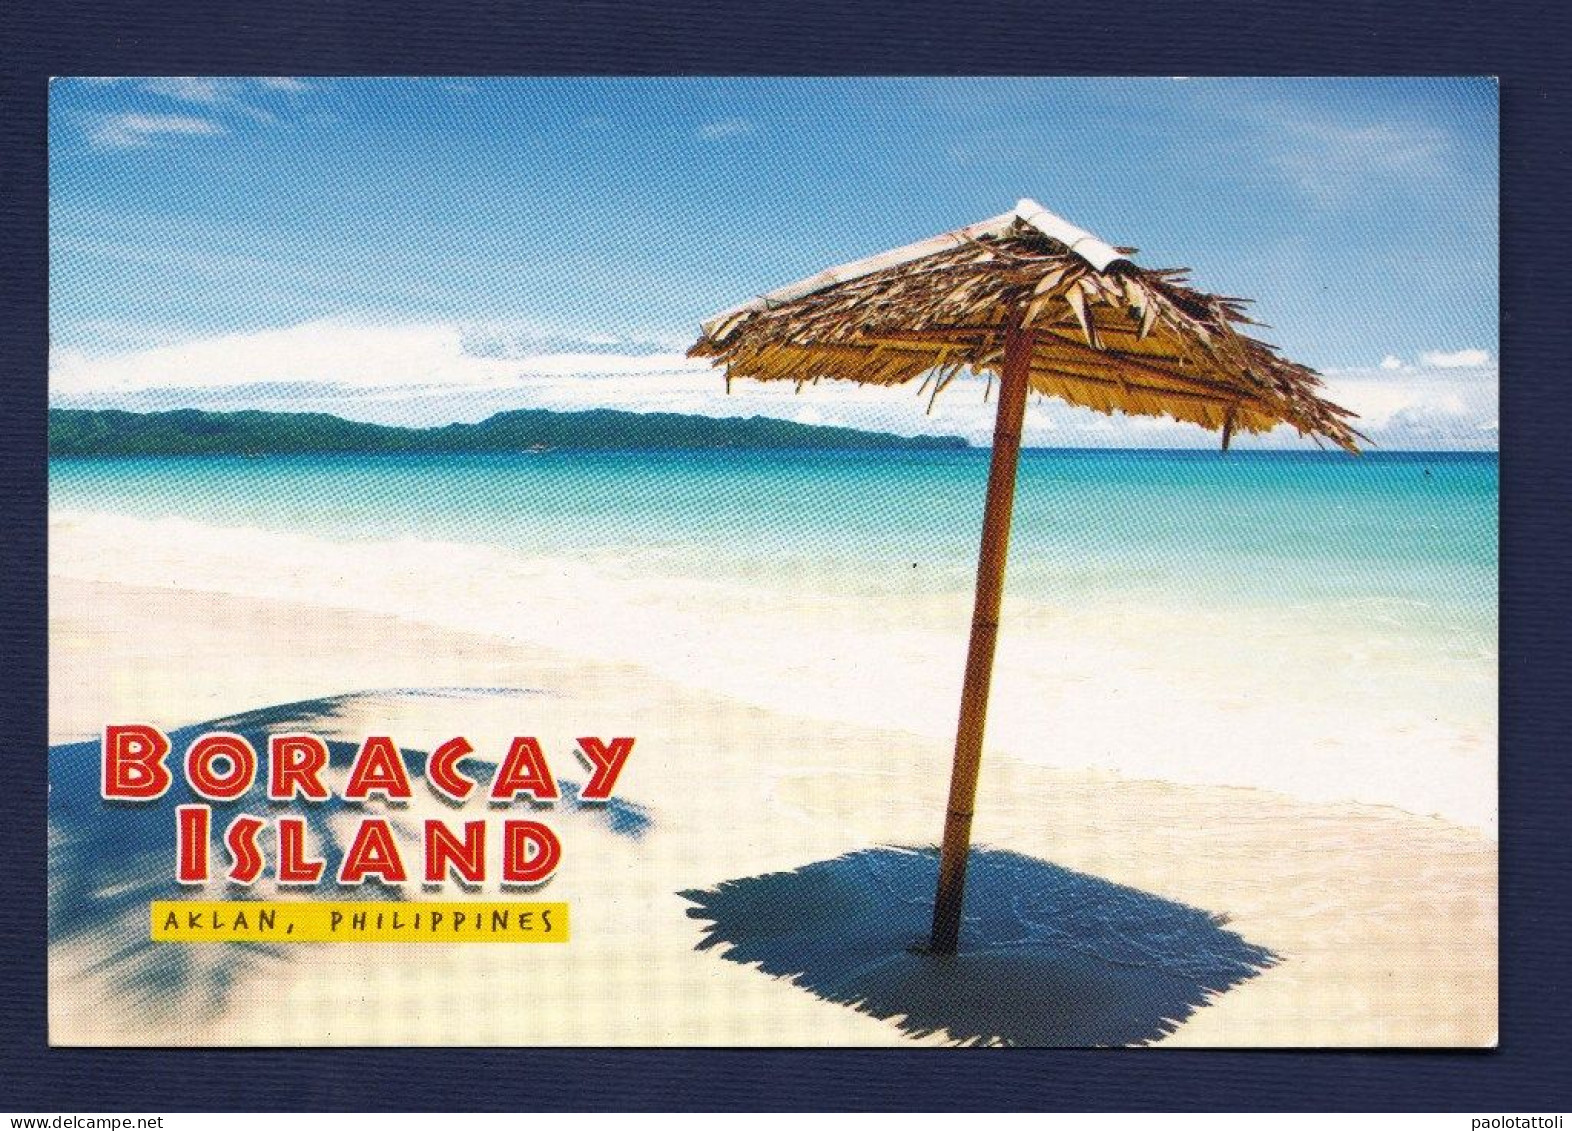 Philippines, Aklan, Boracay Island. New. Standard Size, Back Divided. Ed. Lines & Prints Enterprises. - Philippines